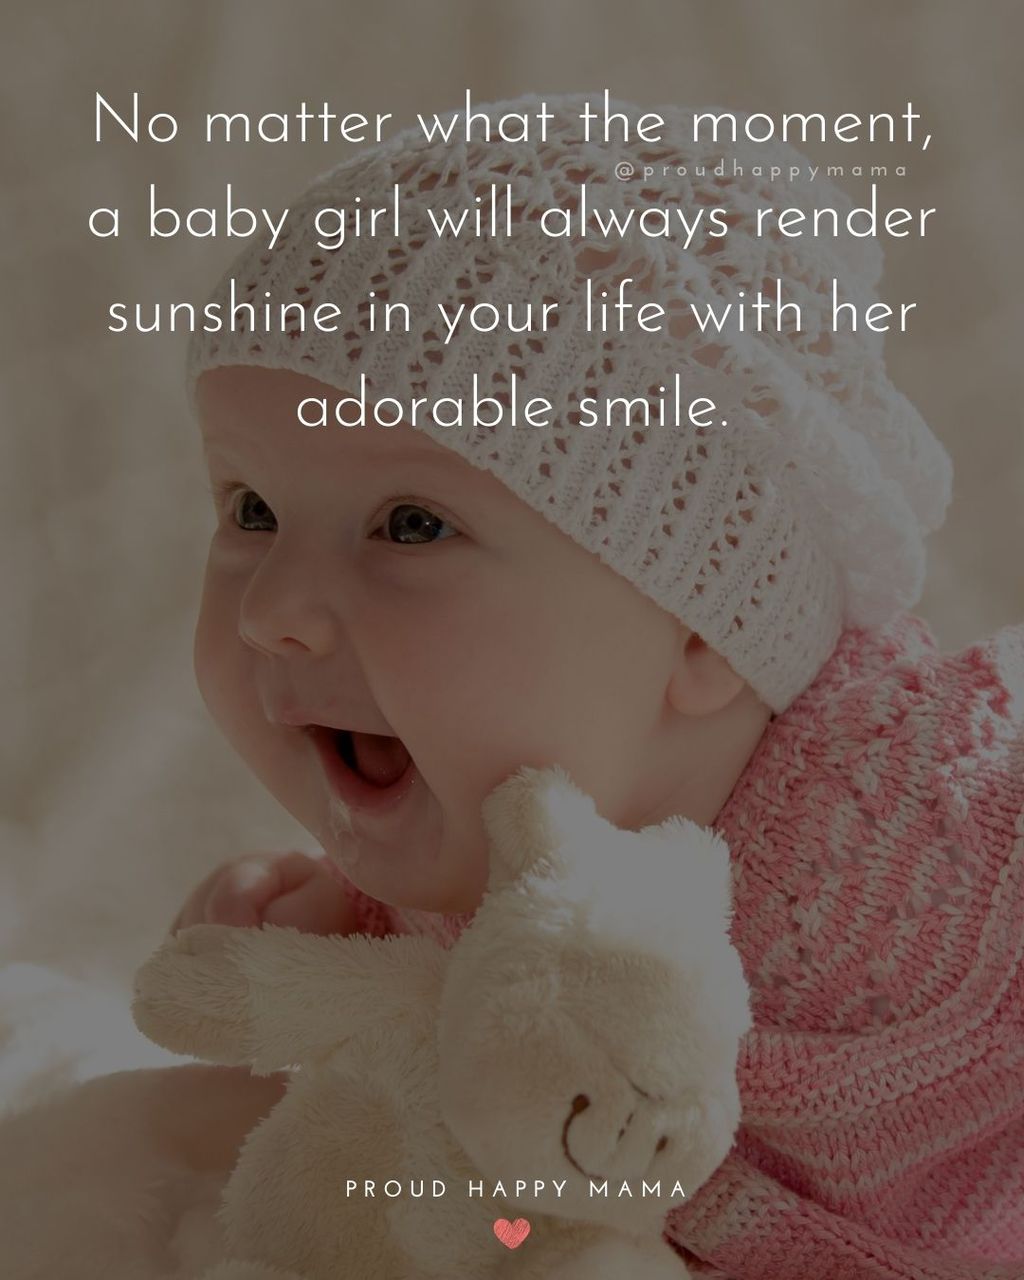 Baby Girl Quotes - No matter what the moment, a baby girl will always render sunshine in your life with her adorable smile.